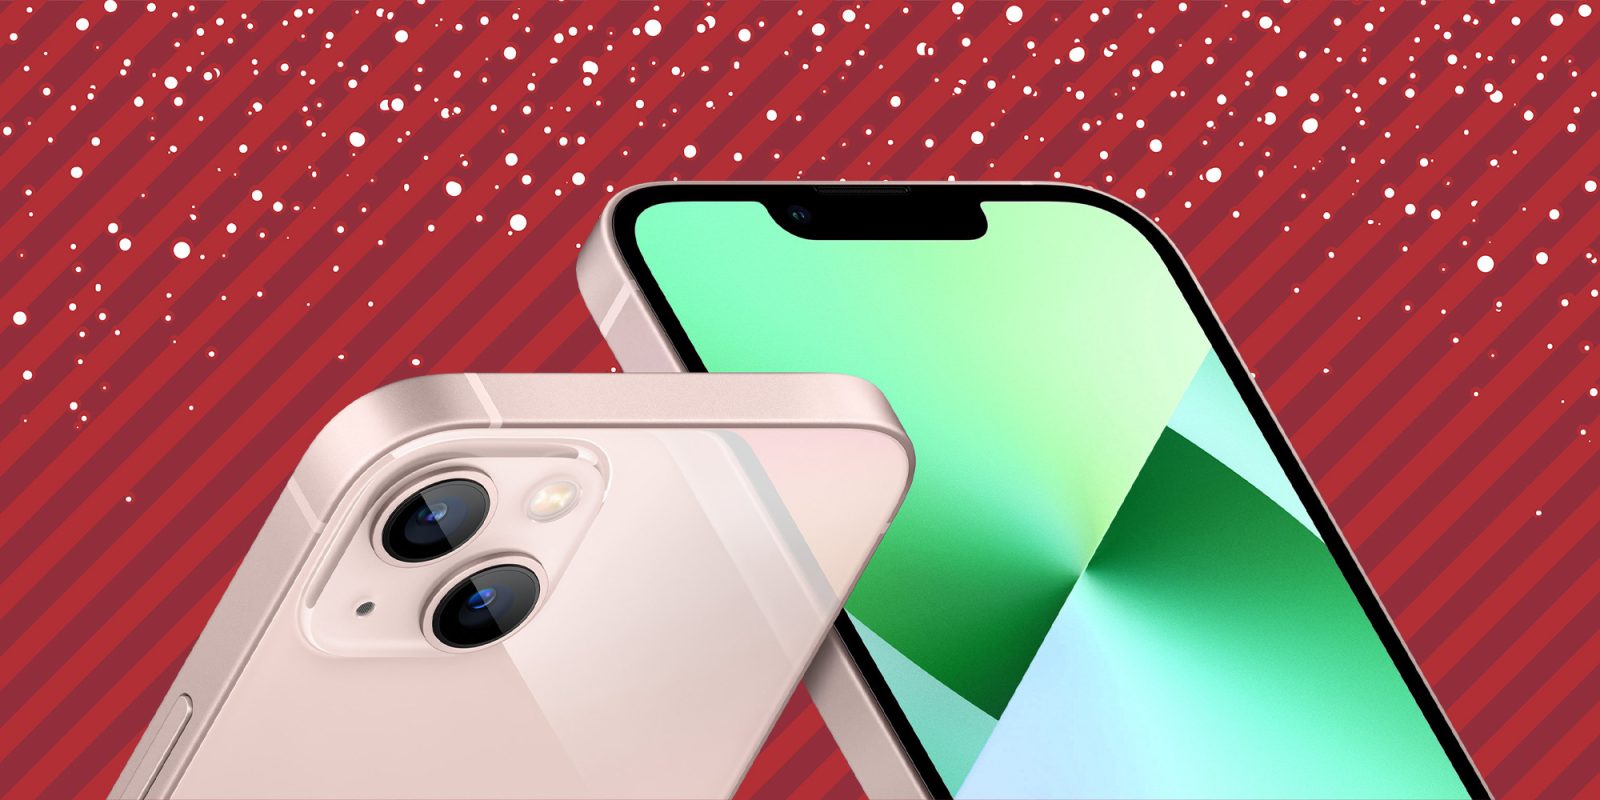 https://9to5mac.com/wp-content/uploads/sites/6/2021/12/Holiday-header-iphone-13.jpg?quality=82&strip=all&w=1600